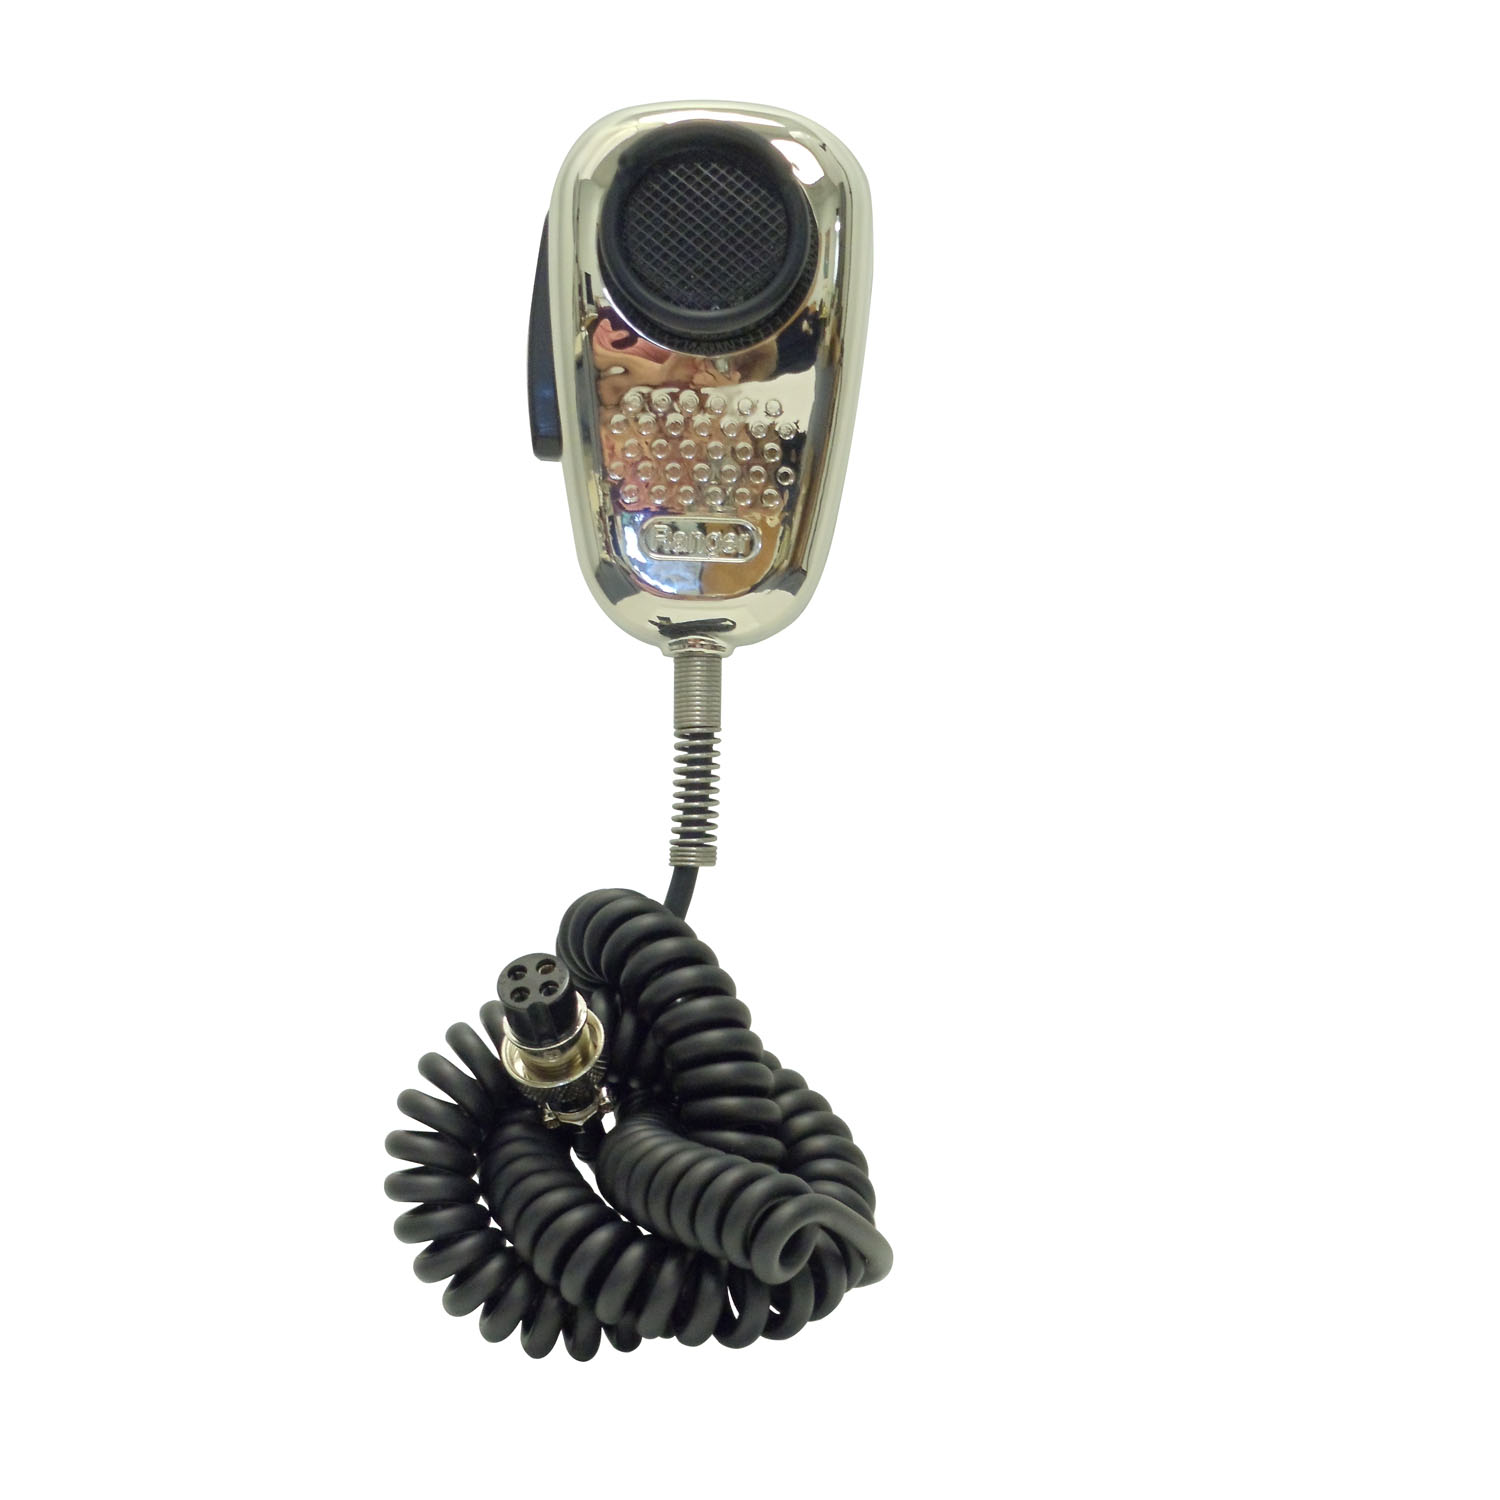 Ranger - Sra-198C Chrome Noise Cancelling Microphone Wired 4-Pin Standard For Cb & Ham Radios